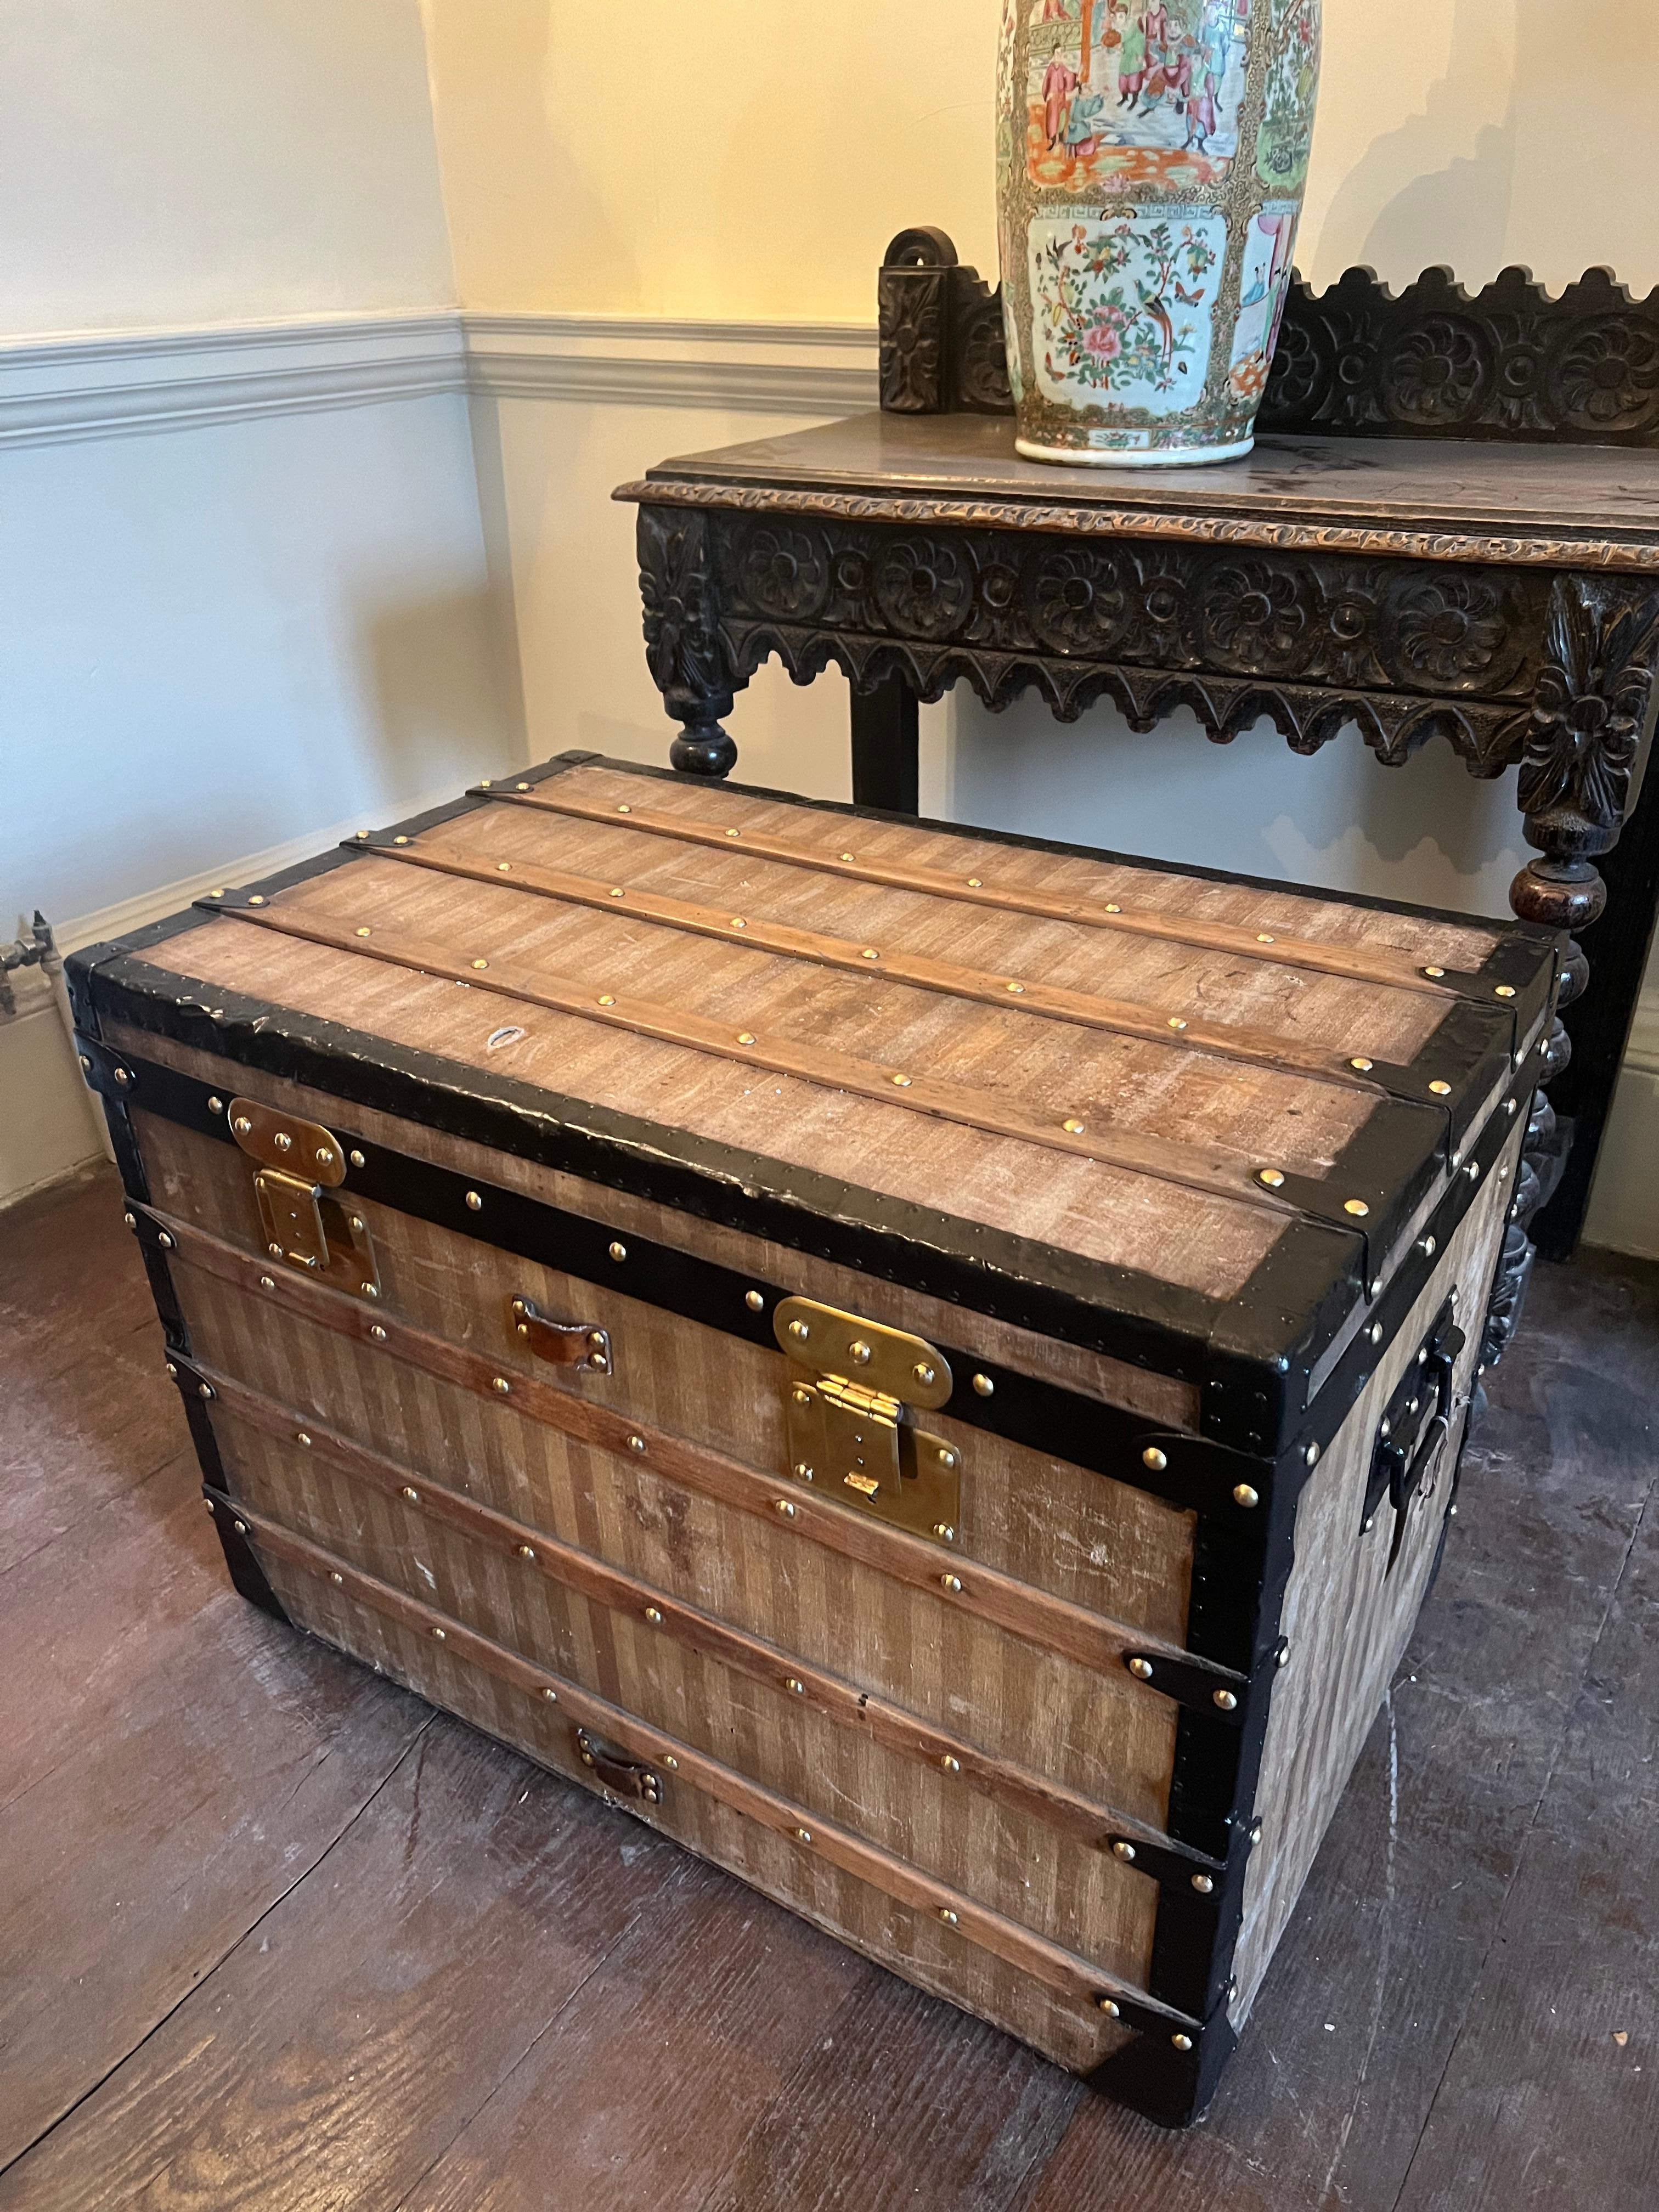 A Lovely and extremely Rare Louis Vuitton Striped Rayee trunk. 
Condition is great considering age, original key is present. Features all original Hardware, and LV stamps. This piece would look fantastic in any modern or traditional interior. 
Circa